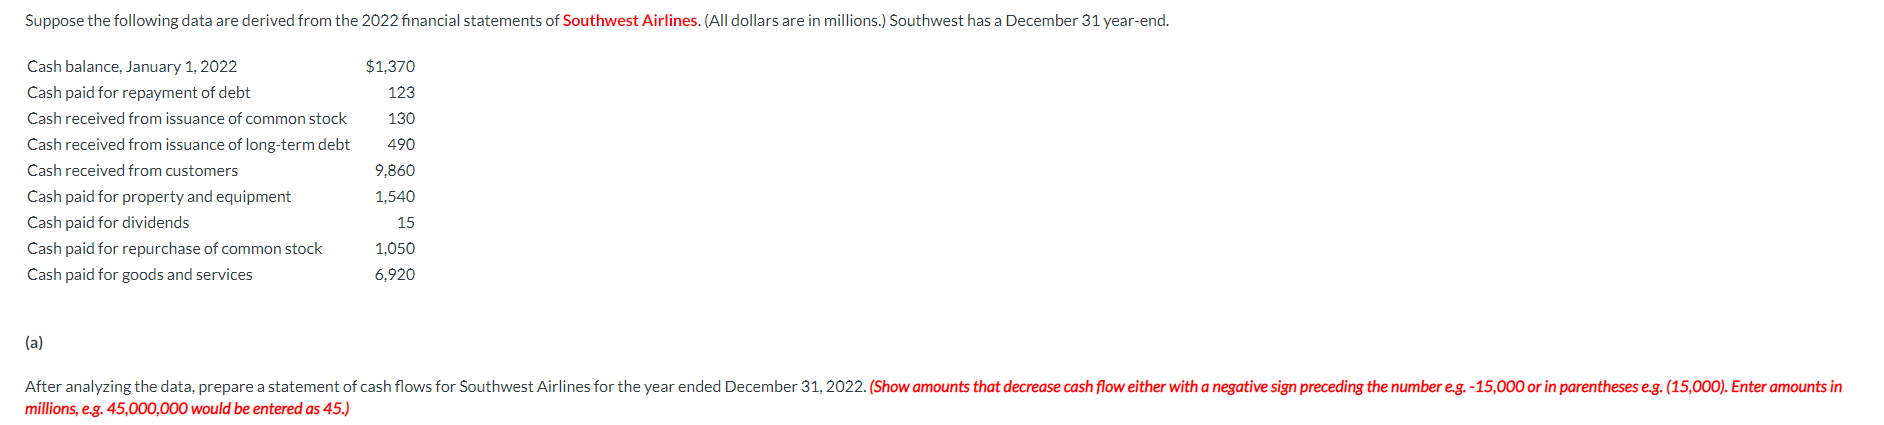 Suppose the following data are derived from the 2022 financial statements of Southwest Airlines. (All dollars are in millions.) Southwest has a December 31 year-end.
$1,370
Cash balance, January 1, 2022
Cash paid for repayment of debt
123
Cash received from issuance of common stock
130
Cash received from issuance of long-term debt
Cash received from customers
490
9,860
Cash paid for property and equipment
Cash paid for dividends
Cash paid for repurchase of common stock
Cash paid for goods and services
1,540
15
1,050
6,920
(a)
After analyzing the data, prepare a statement of cash flows for Southwest Airlines for the year ended December 31, 2022. (Show amounts that decrease cash flow either with a negative sign preceding the number e.g. -15,000 or in parentheses e.g. (15,000). Enter amounts in
millions, e.g. 45,000,000 would be entered as 45.)
